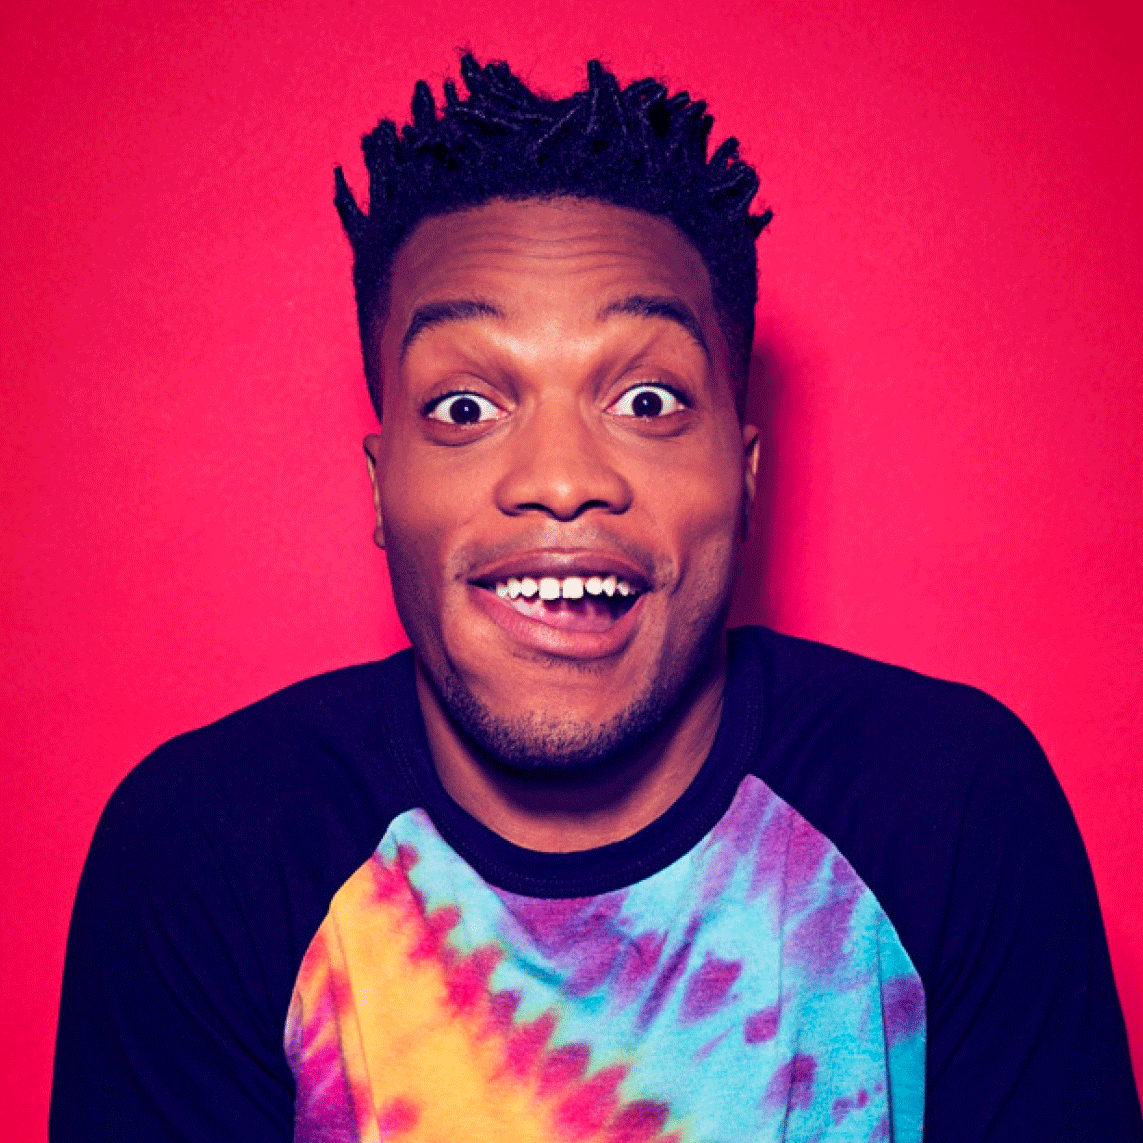 Who is Jermaine Fowler? 